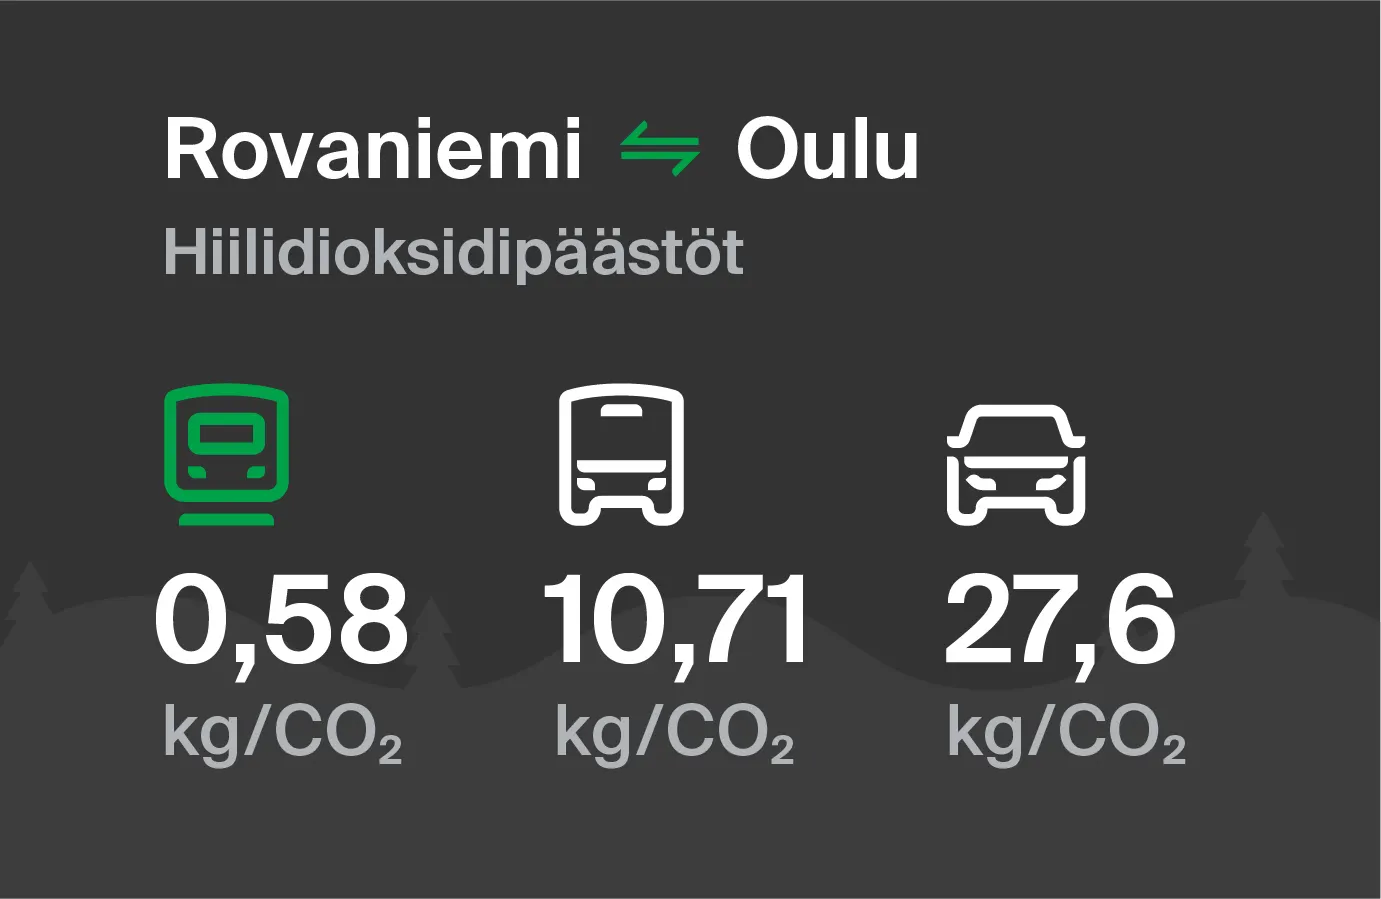 Carbon dioxide emissions from Rovaniemi to Oulu by different modes of transport: by train 0.58 kg/CO2, by bus 10.71 kg/CO2 and by car 27.6 kg/CO2.